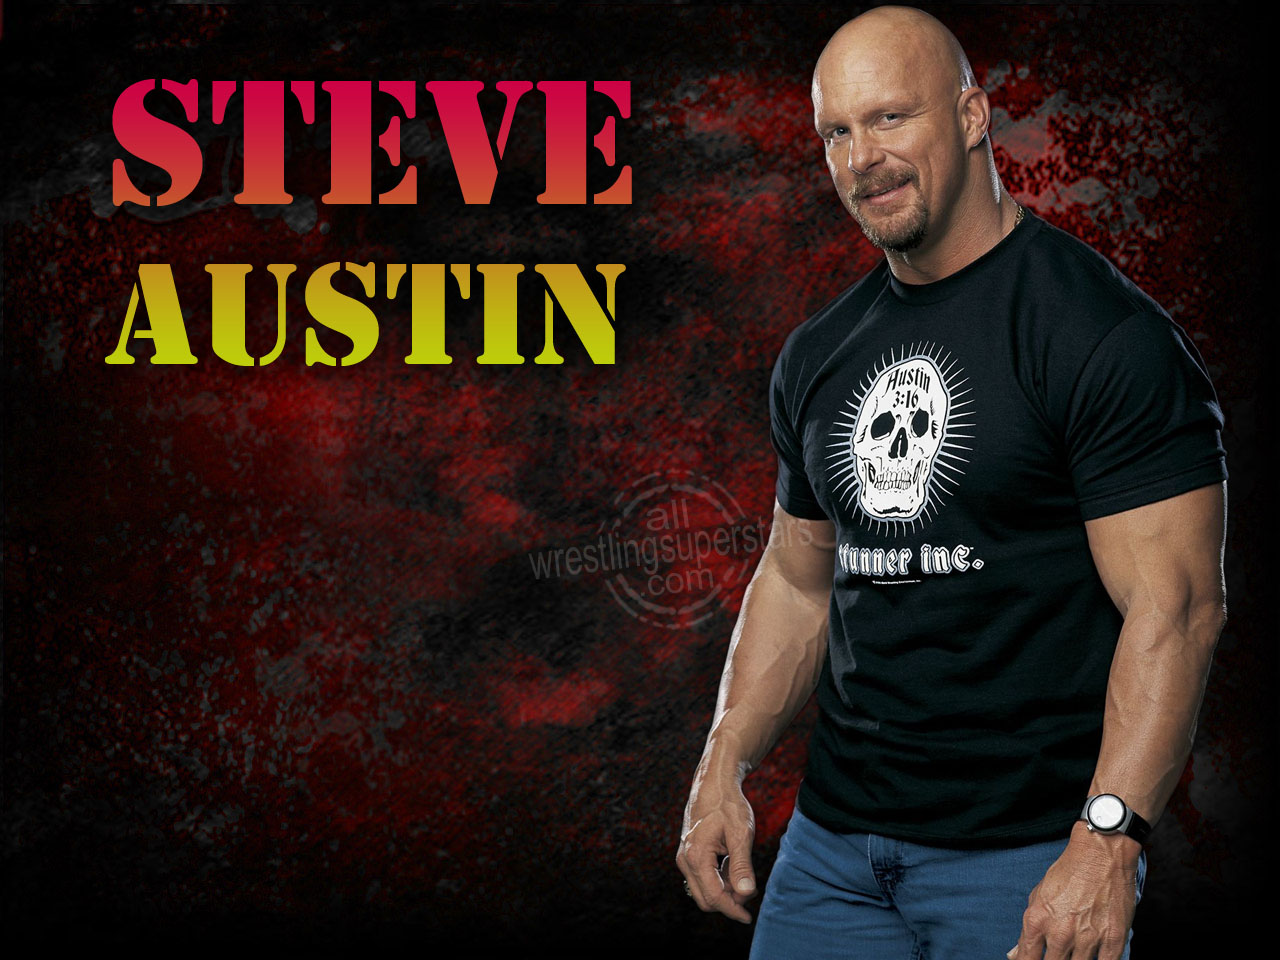 WWE WALLPAPERS: Stone cold | Stone cold wallpaper | stone cold hd wallpapers  | stone cold photos | stone cold pictures | stone cold pics | stone cold  images | Stone Cold